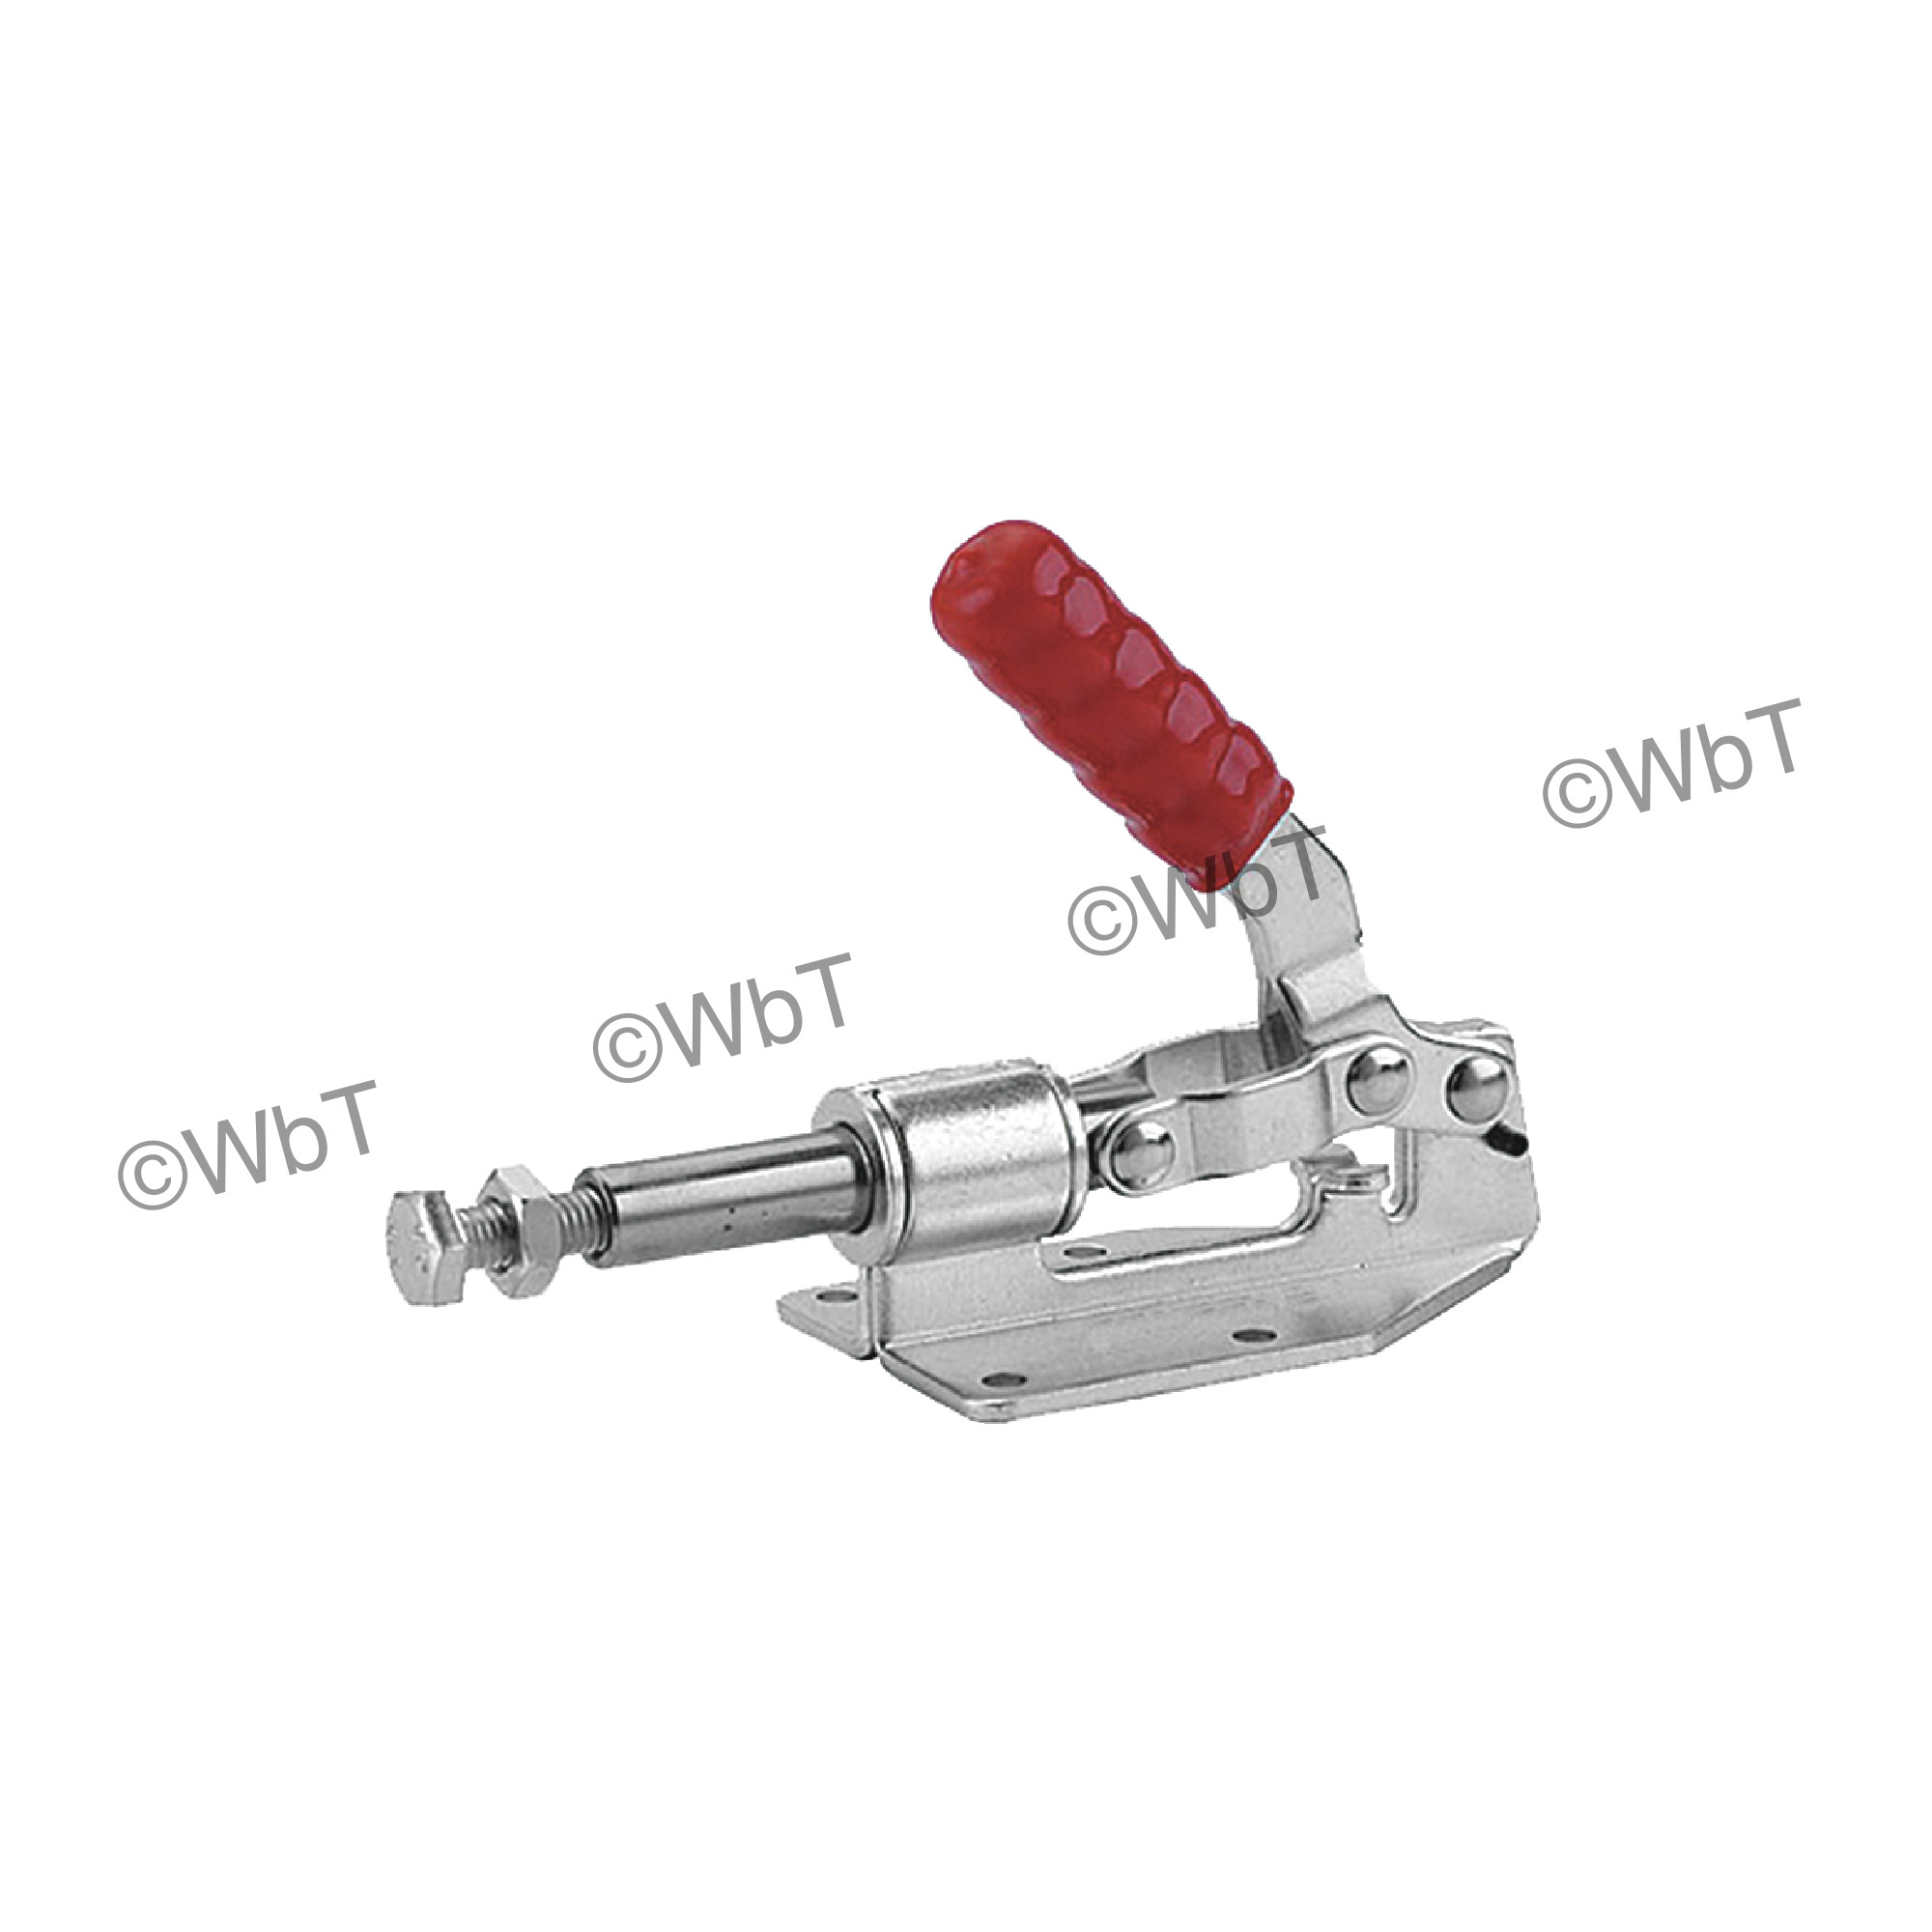 Straight Line Action Toggle Clamp